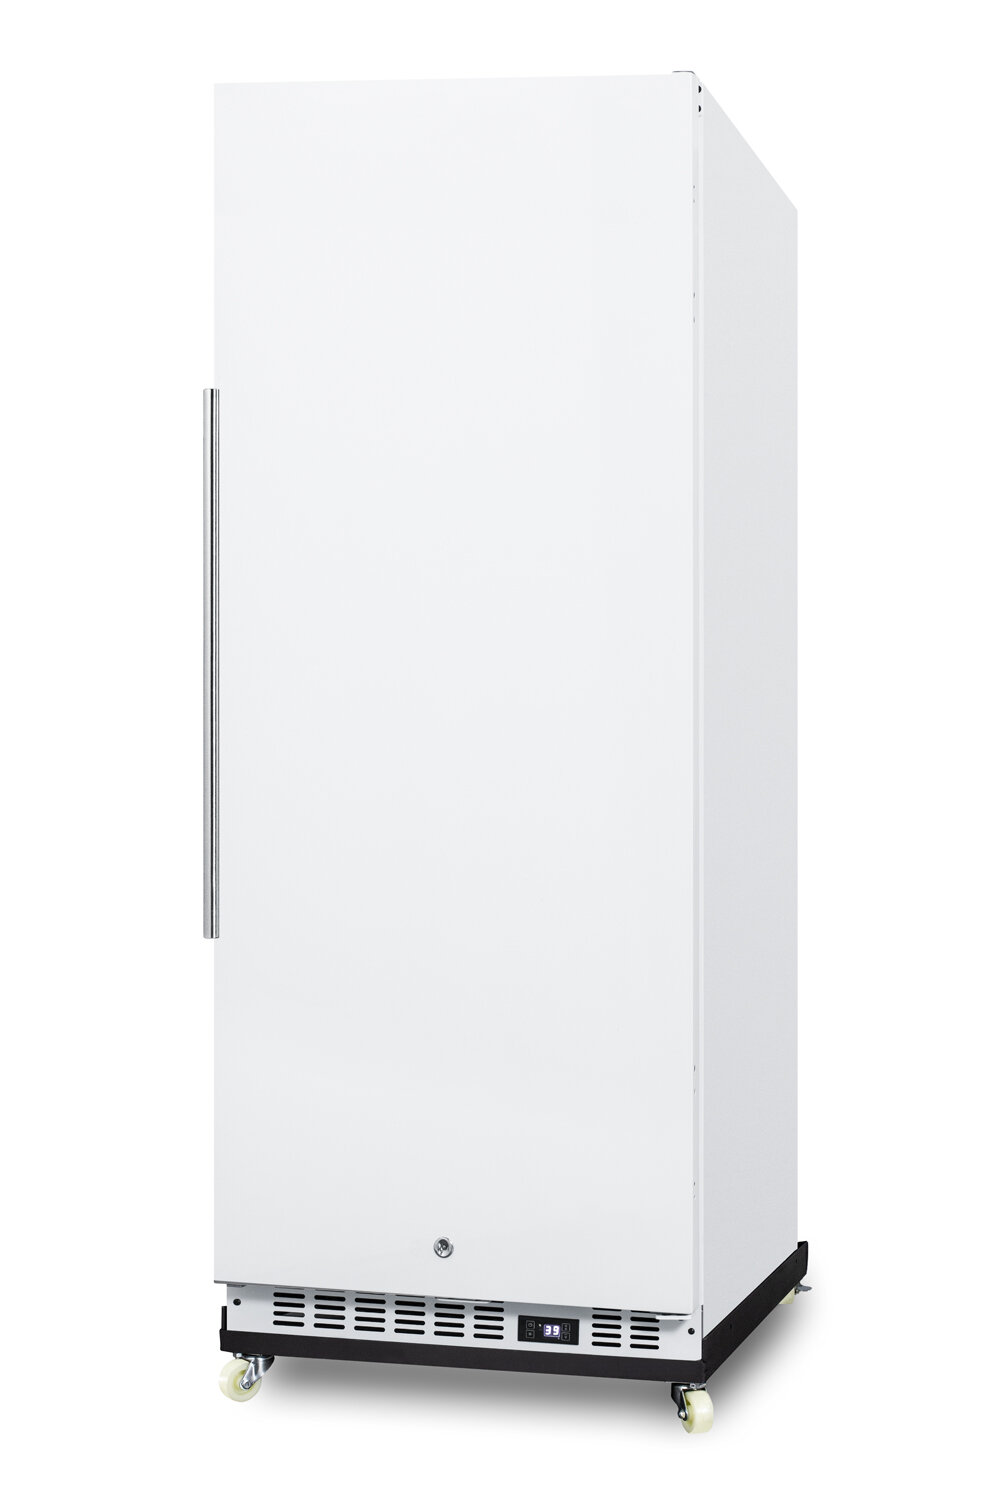 Equator Advanced Appliances Conserv 10-cu ft Counter-depth Built-In  Top-Freezer Refrigerator (Stainless)